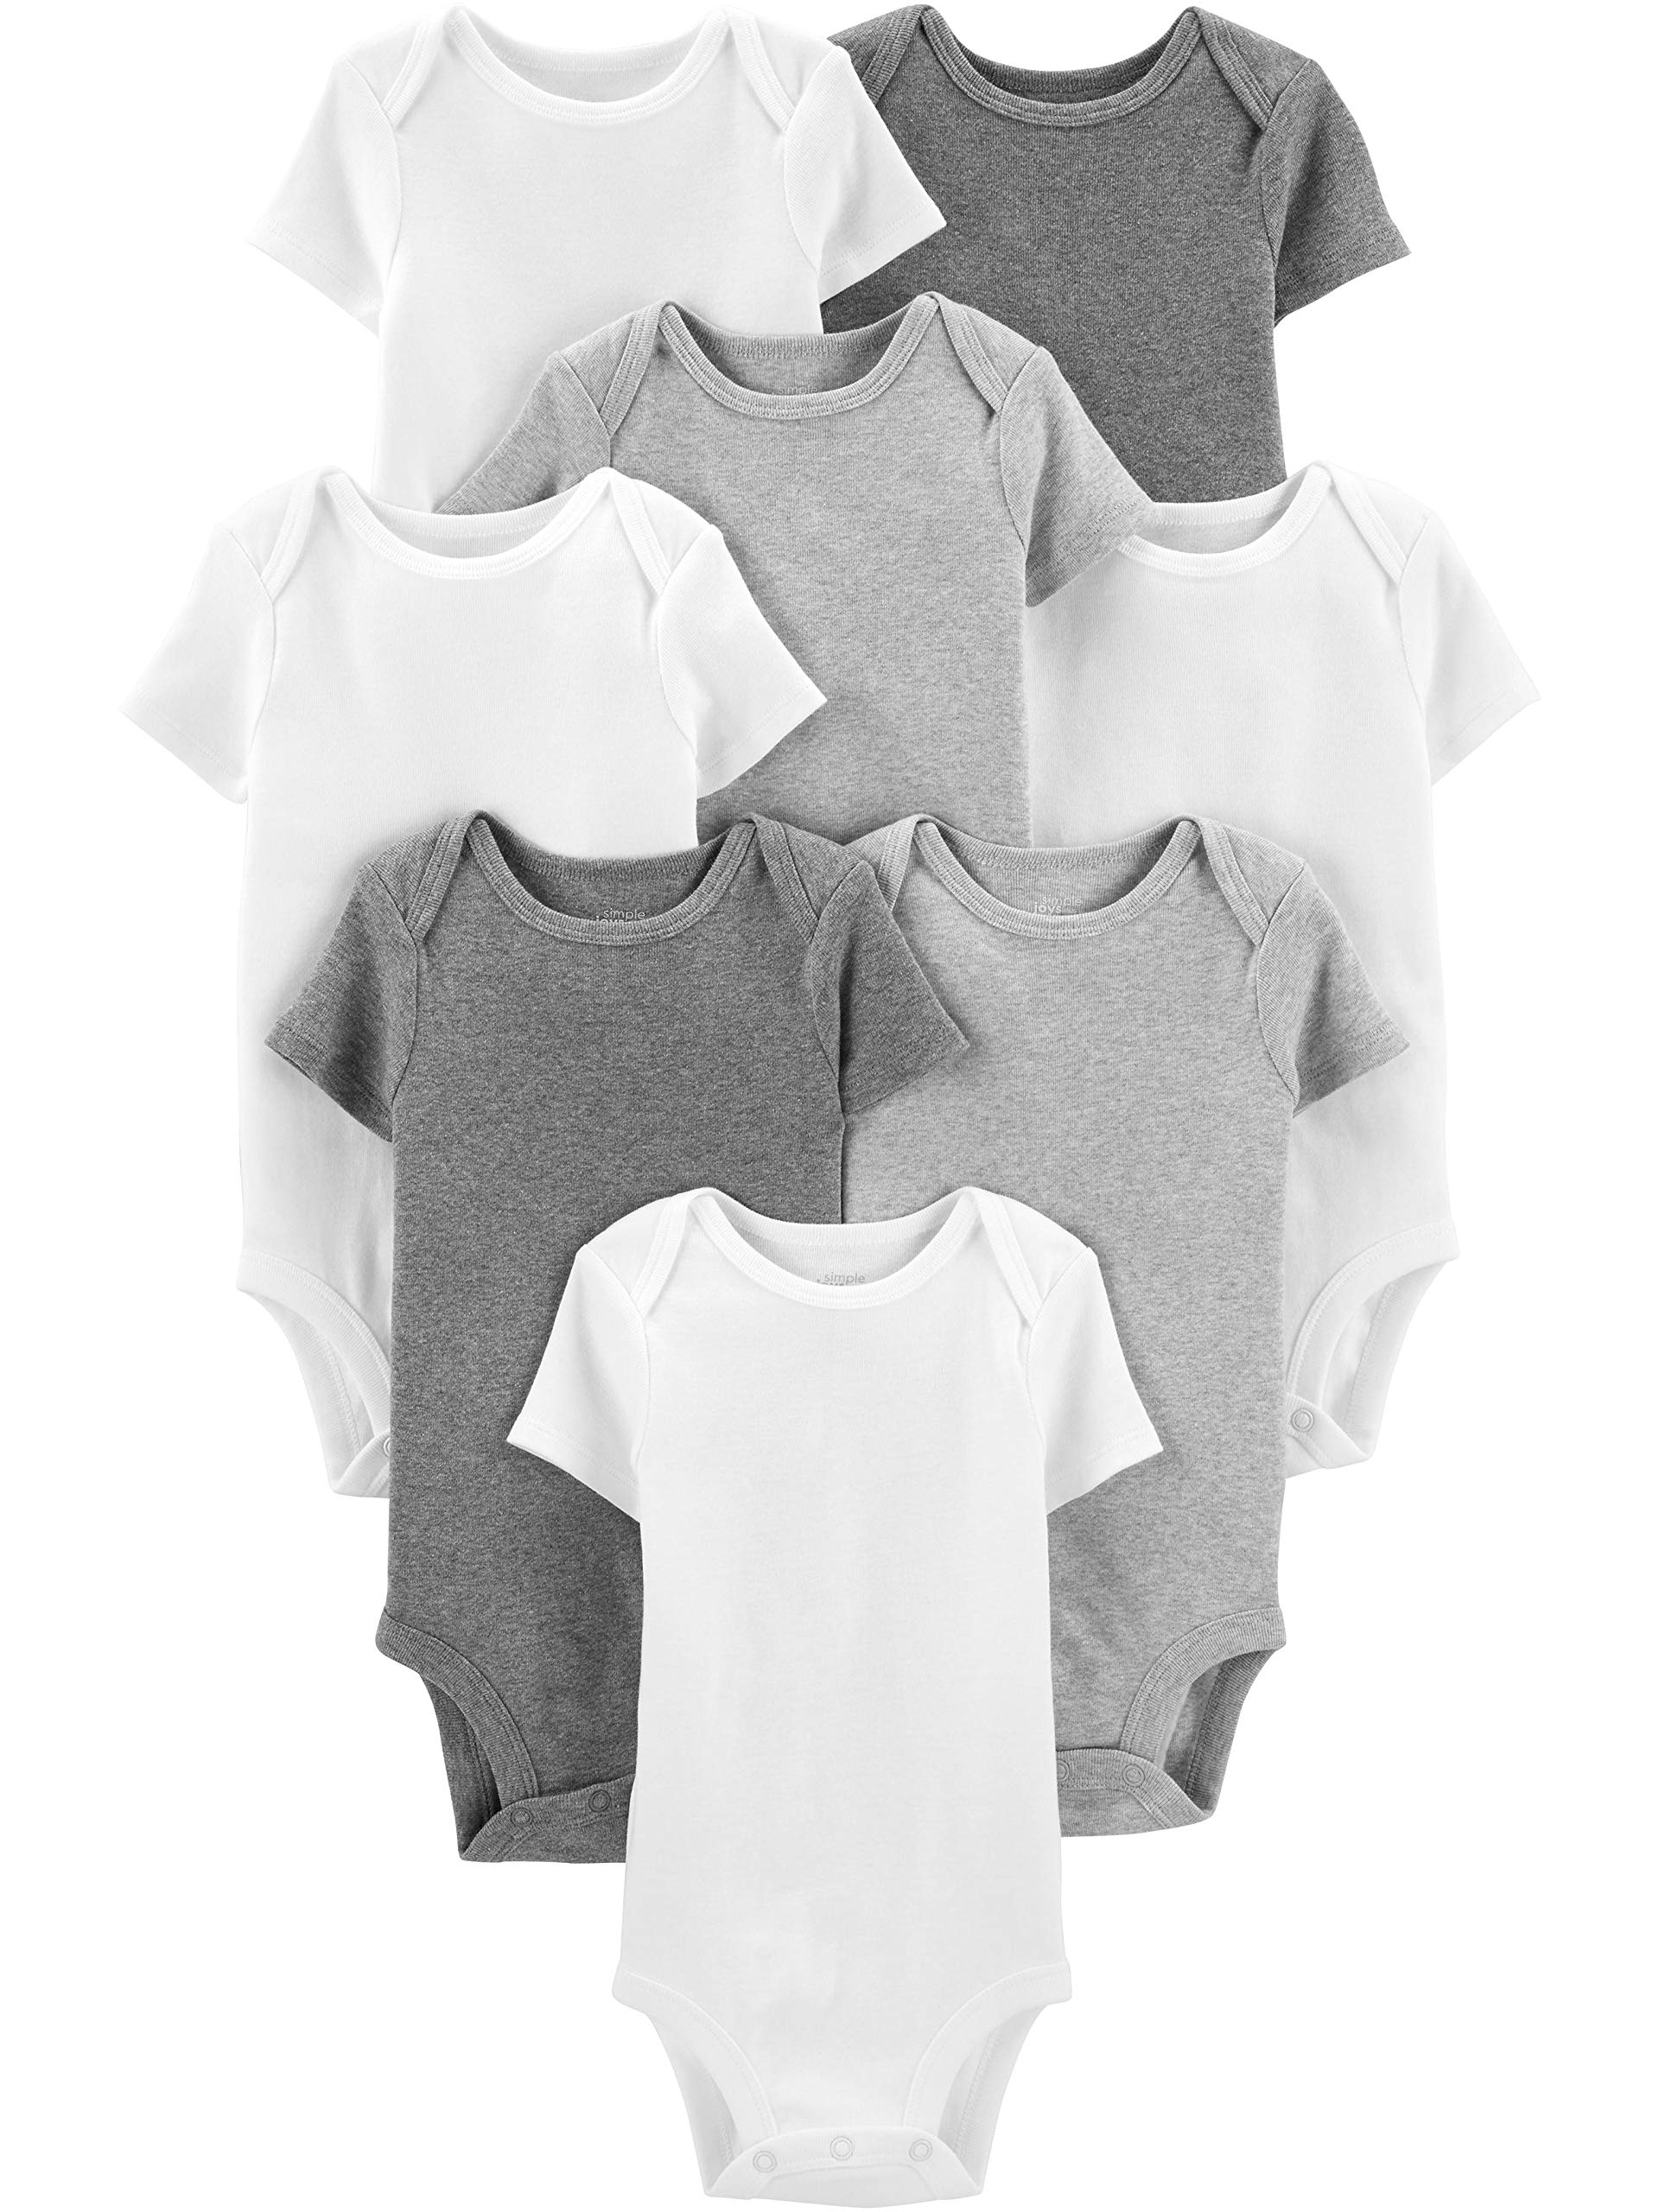 8-Count Carter's Baby Boys' or Girls' Simple Joys 100% Cotton Bodysuit (White/Gray, P-24M) from $14.10 ($1.76 EA) + FS w/ Prime or $35+